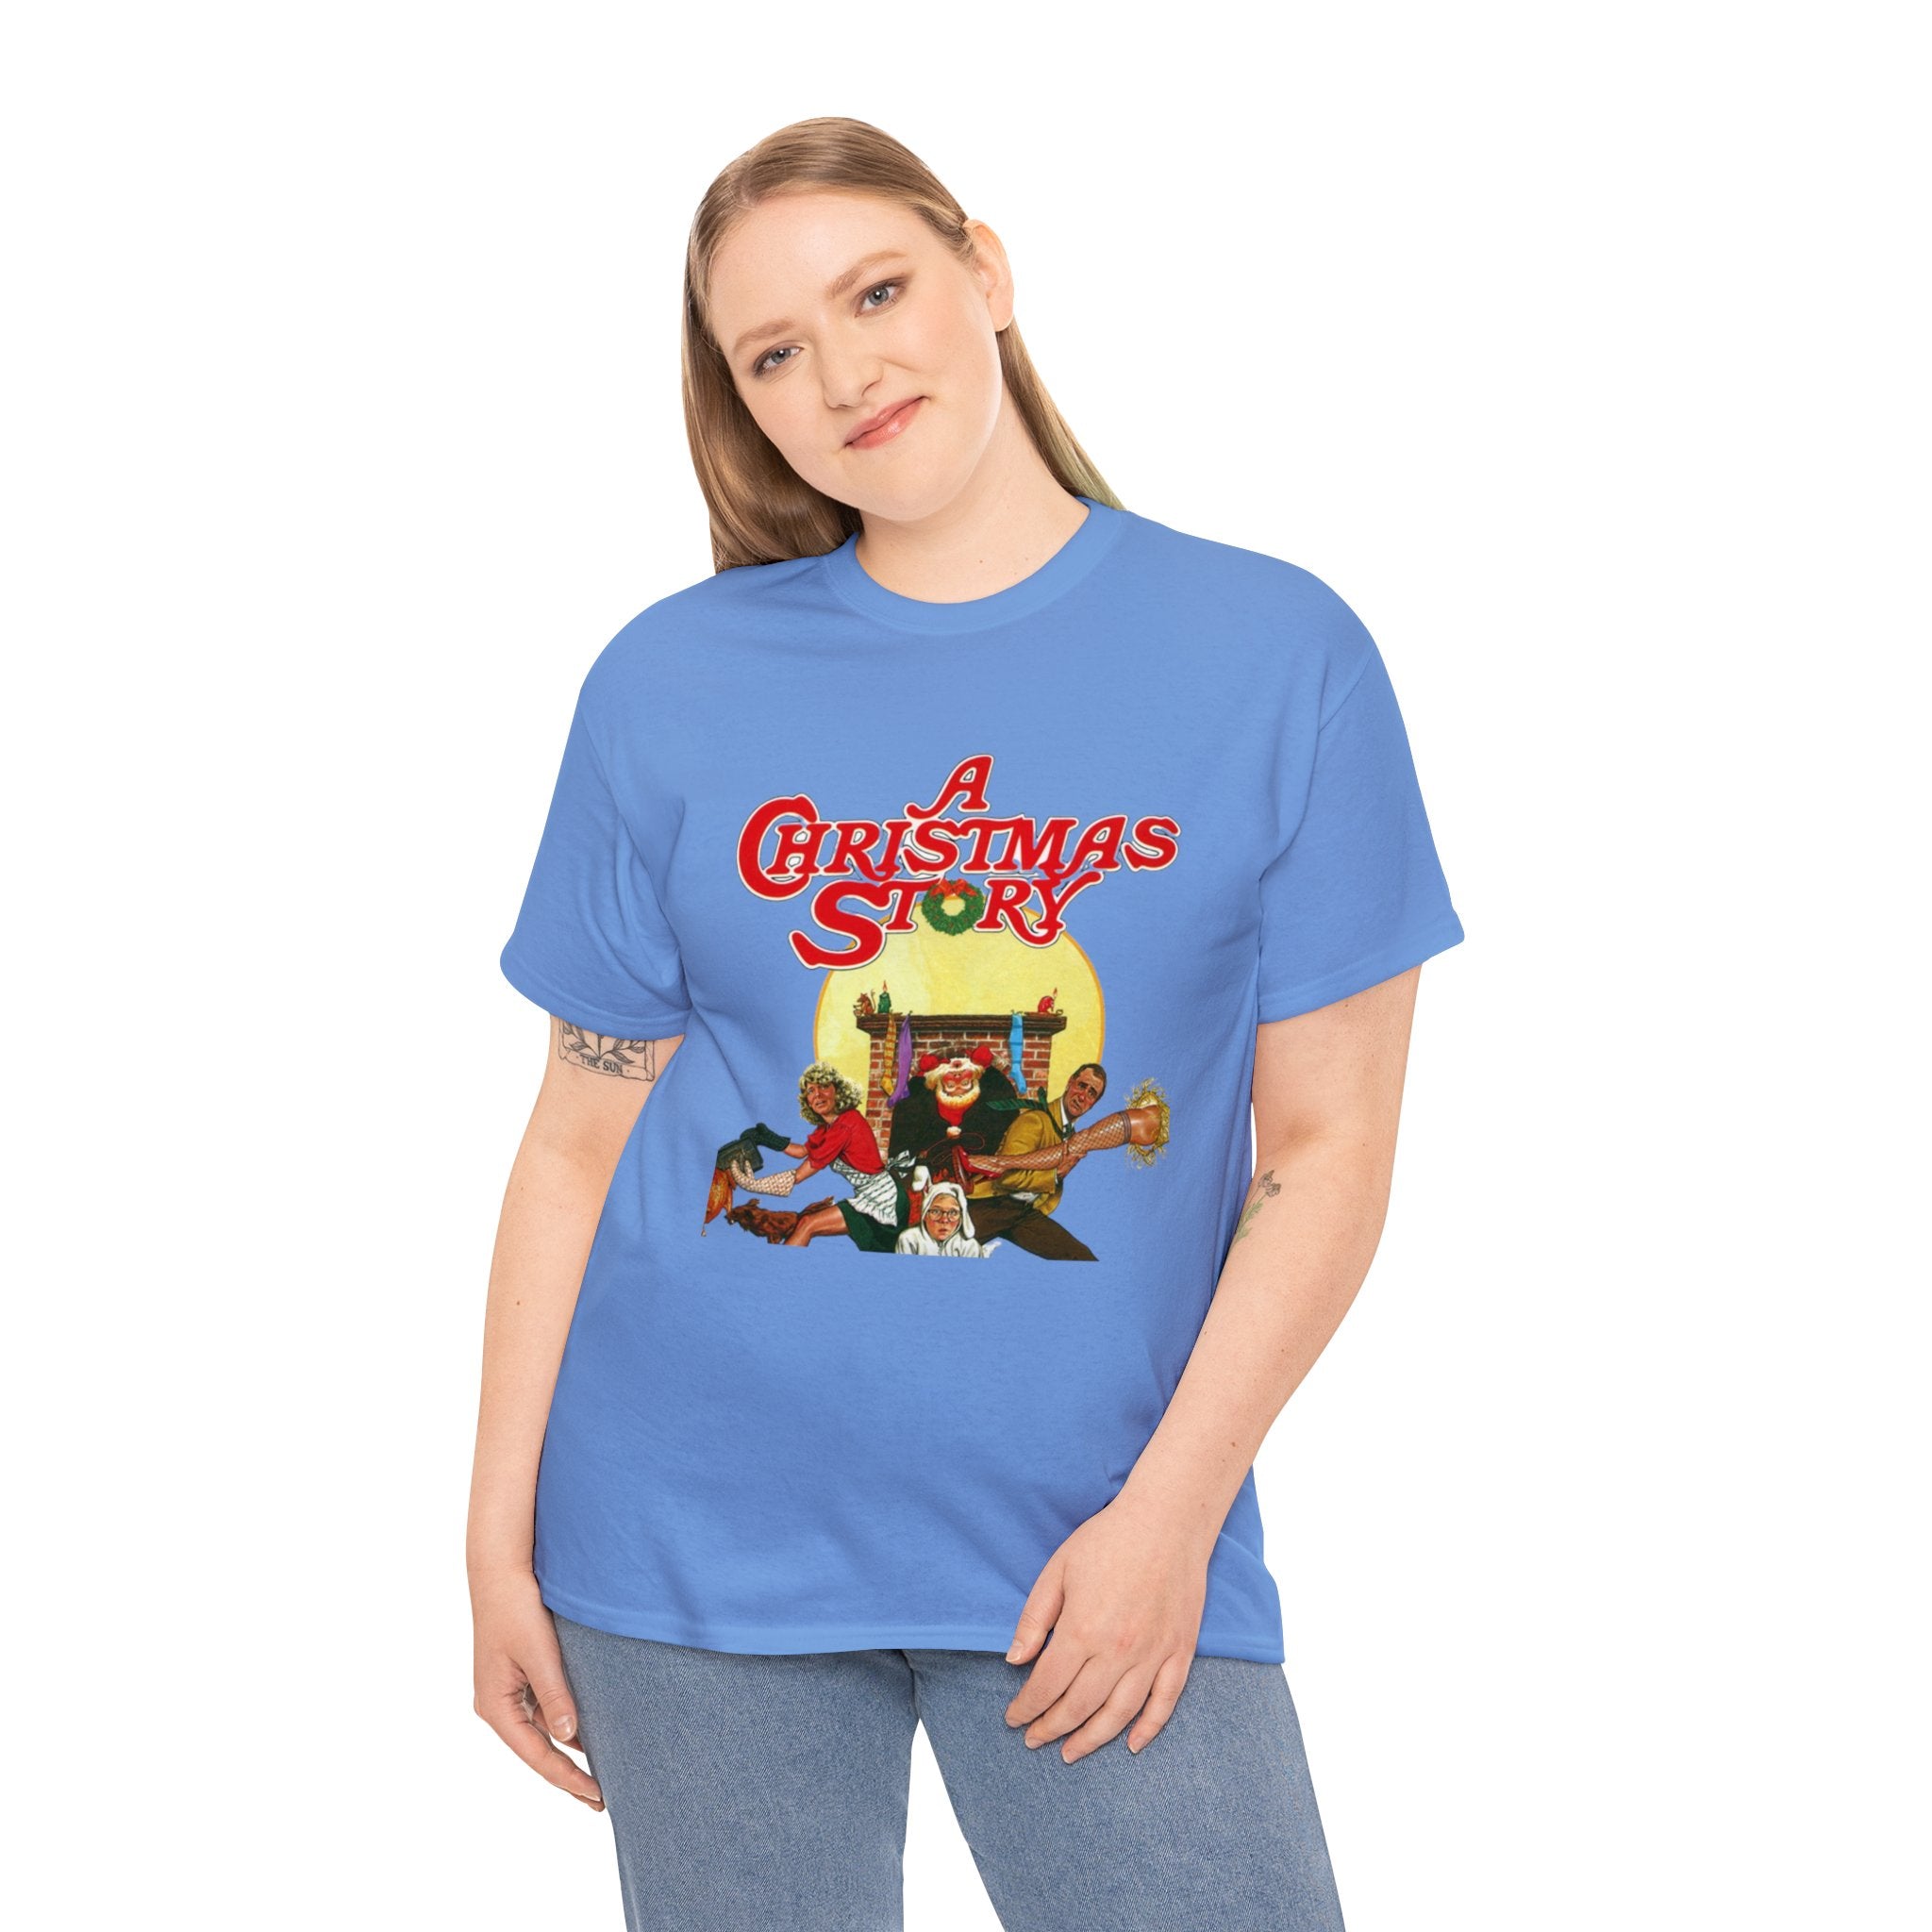 https://creationsbychrisandcarlos.store/products/a-christmas-story-logo-unisex-heavy-cotton-tee